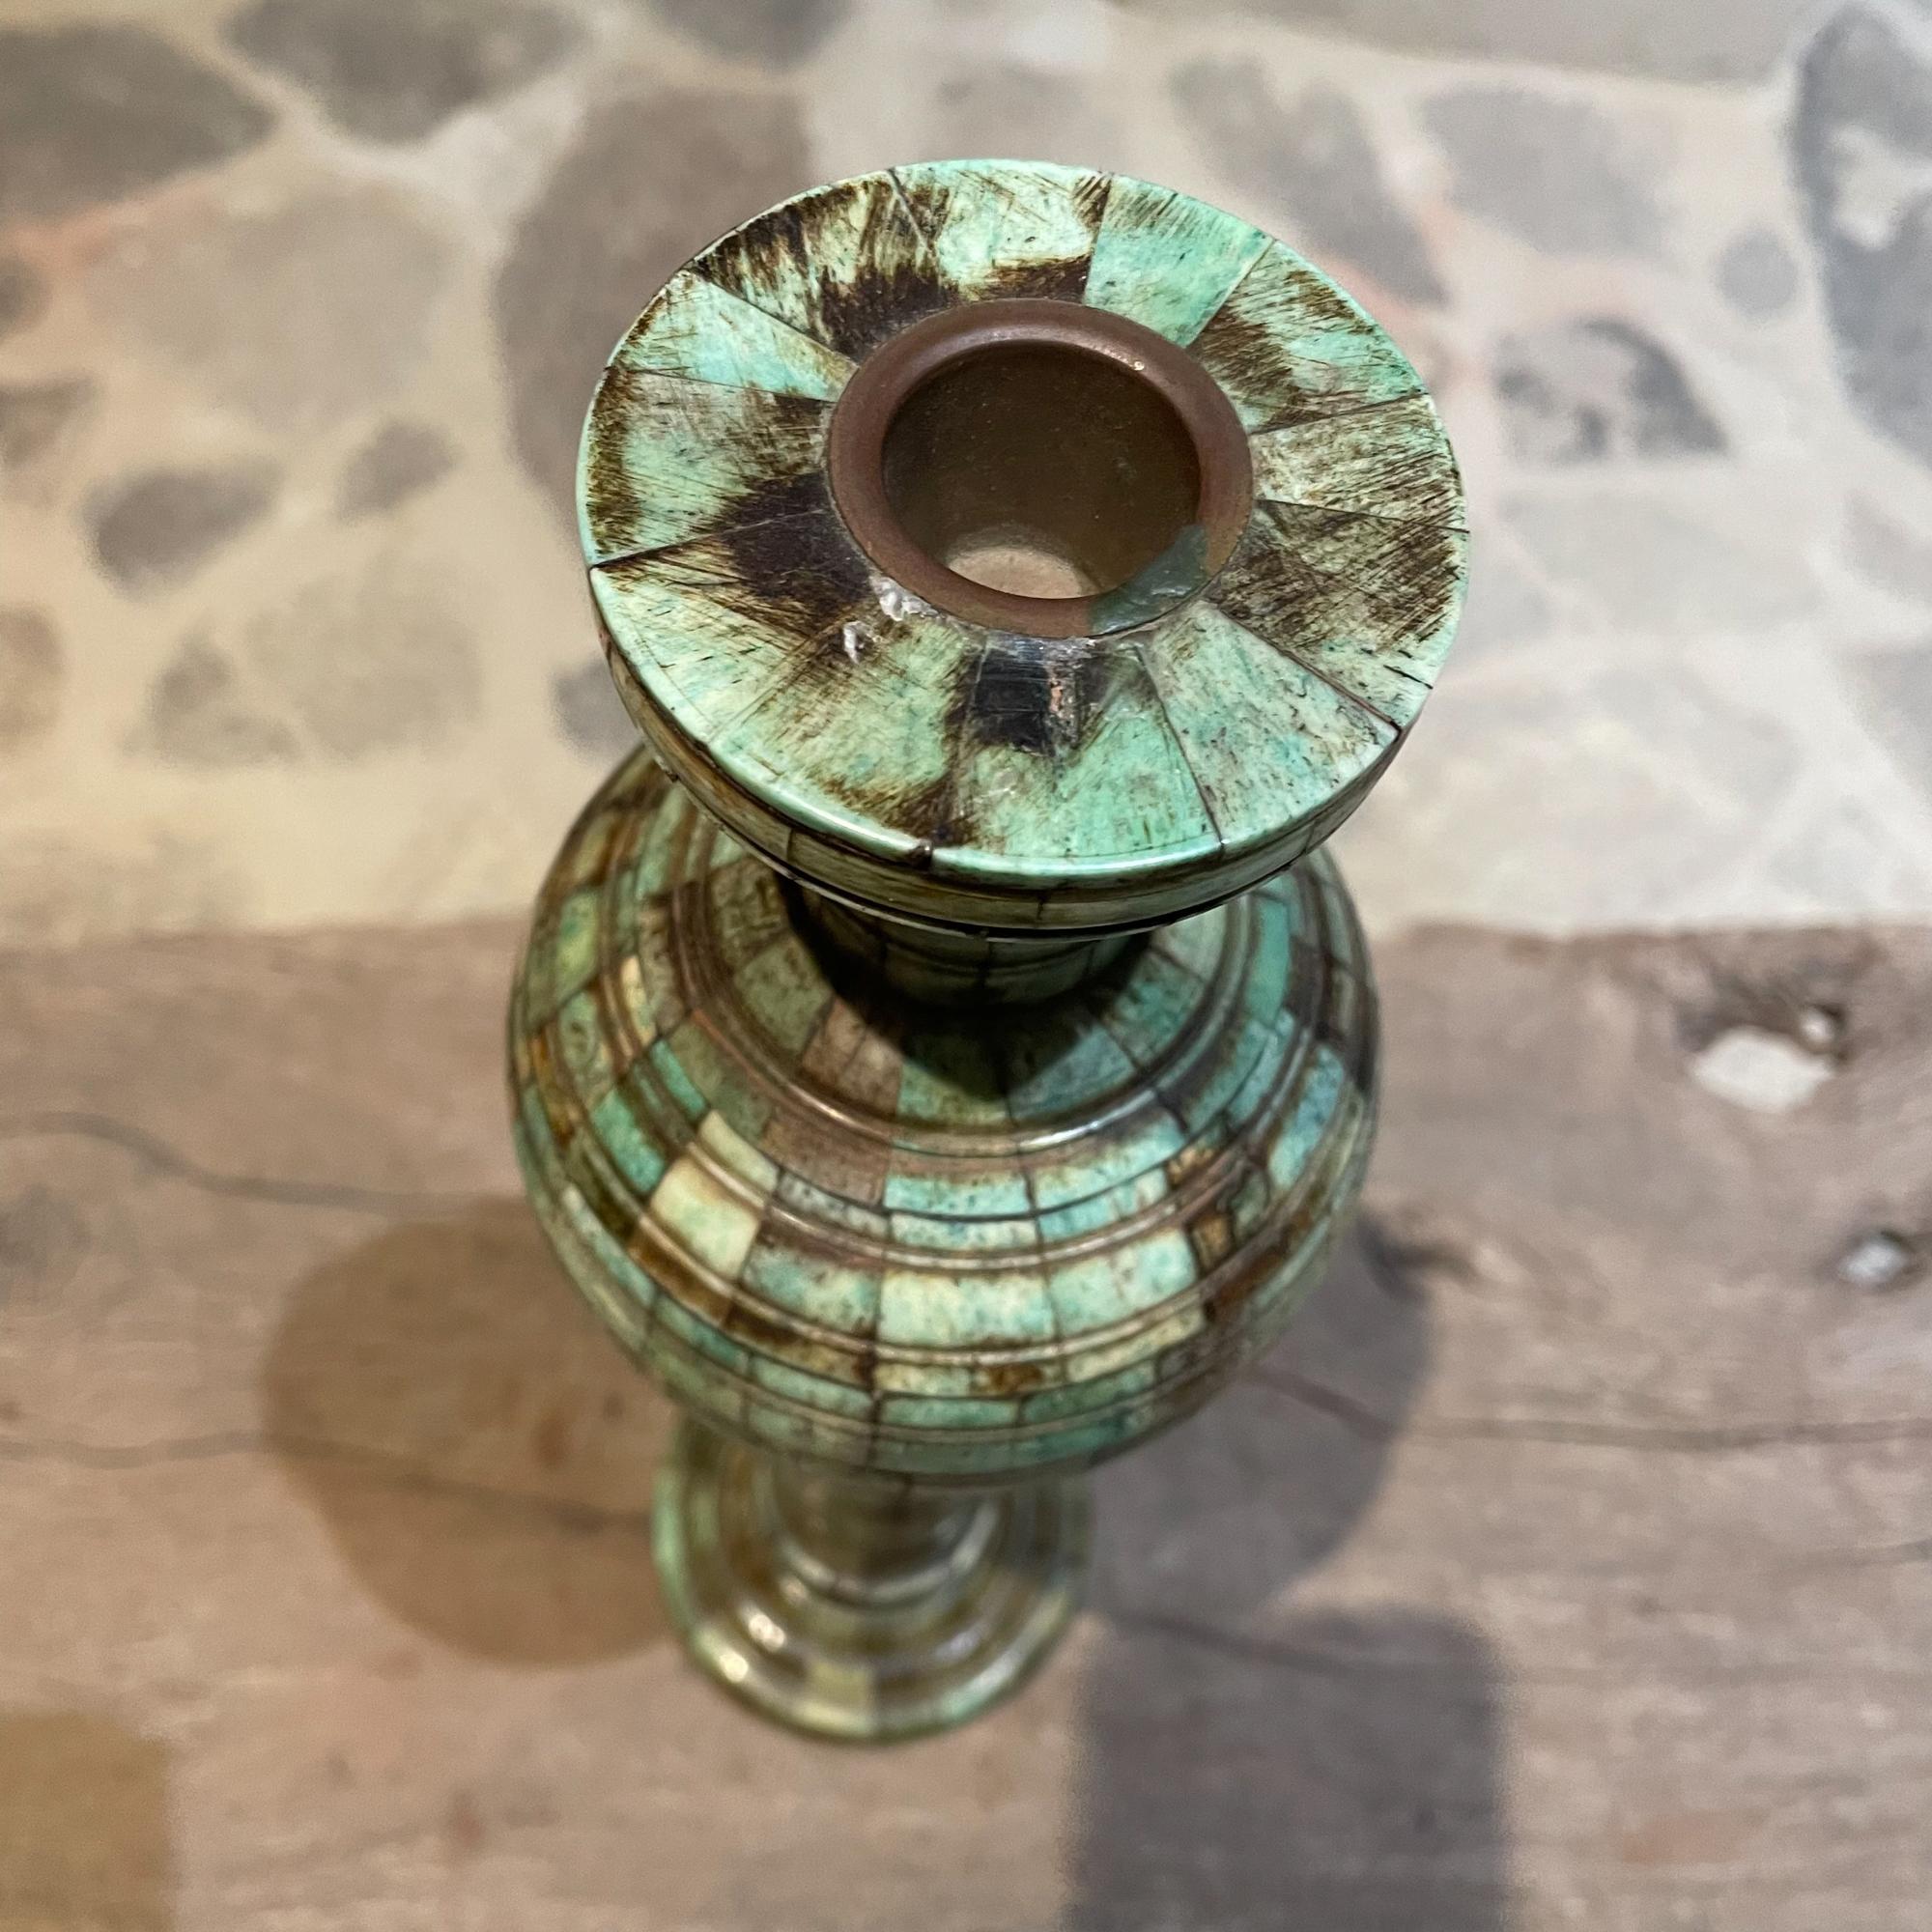 For your consideration: Vintage Modern Tessellated Stone candle holder in Celadon Green with shades of Bronze.
Elegant form in lovely color.
Attributed to tessellated bone design of Maitland Smith. Piece is unmarked. 
Dimensions: 15 height x 4 in